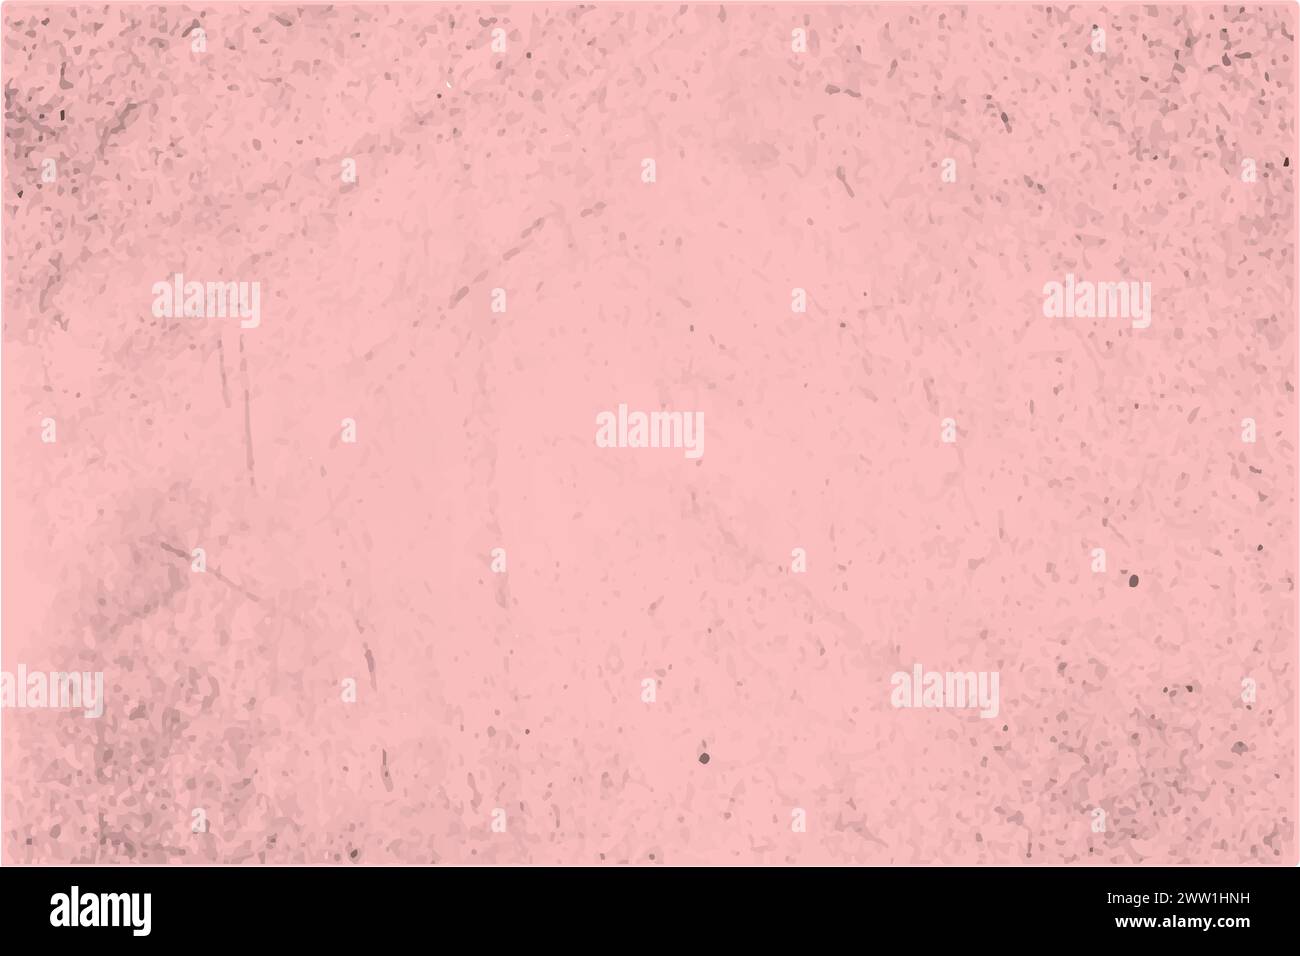 Pink stucco abstract texture wall background vector. Stock Vector